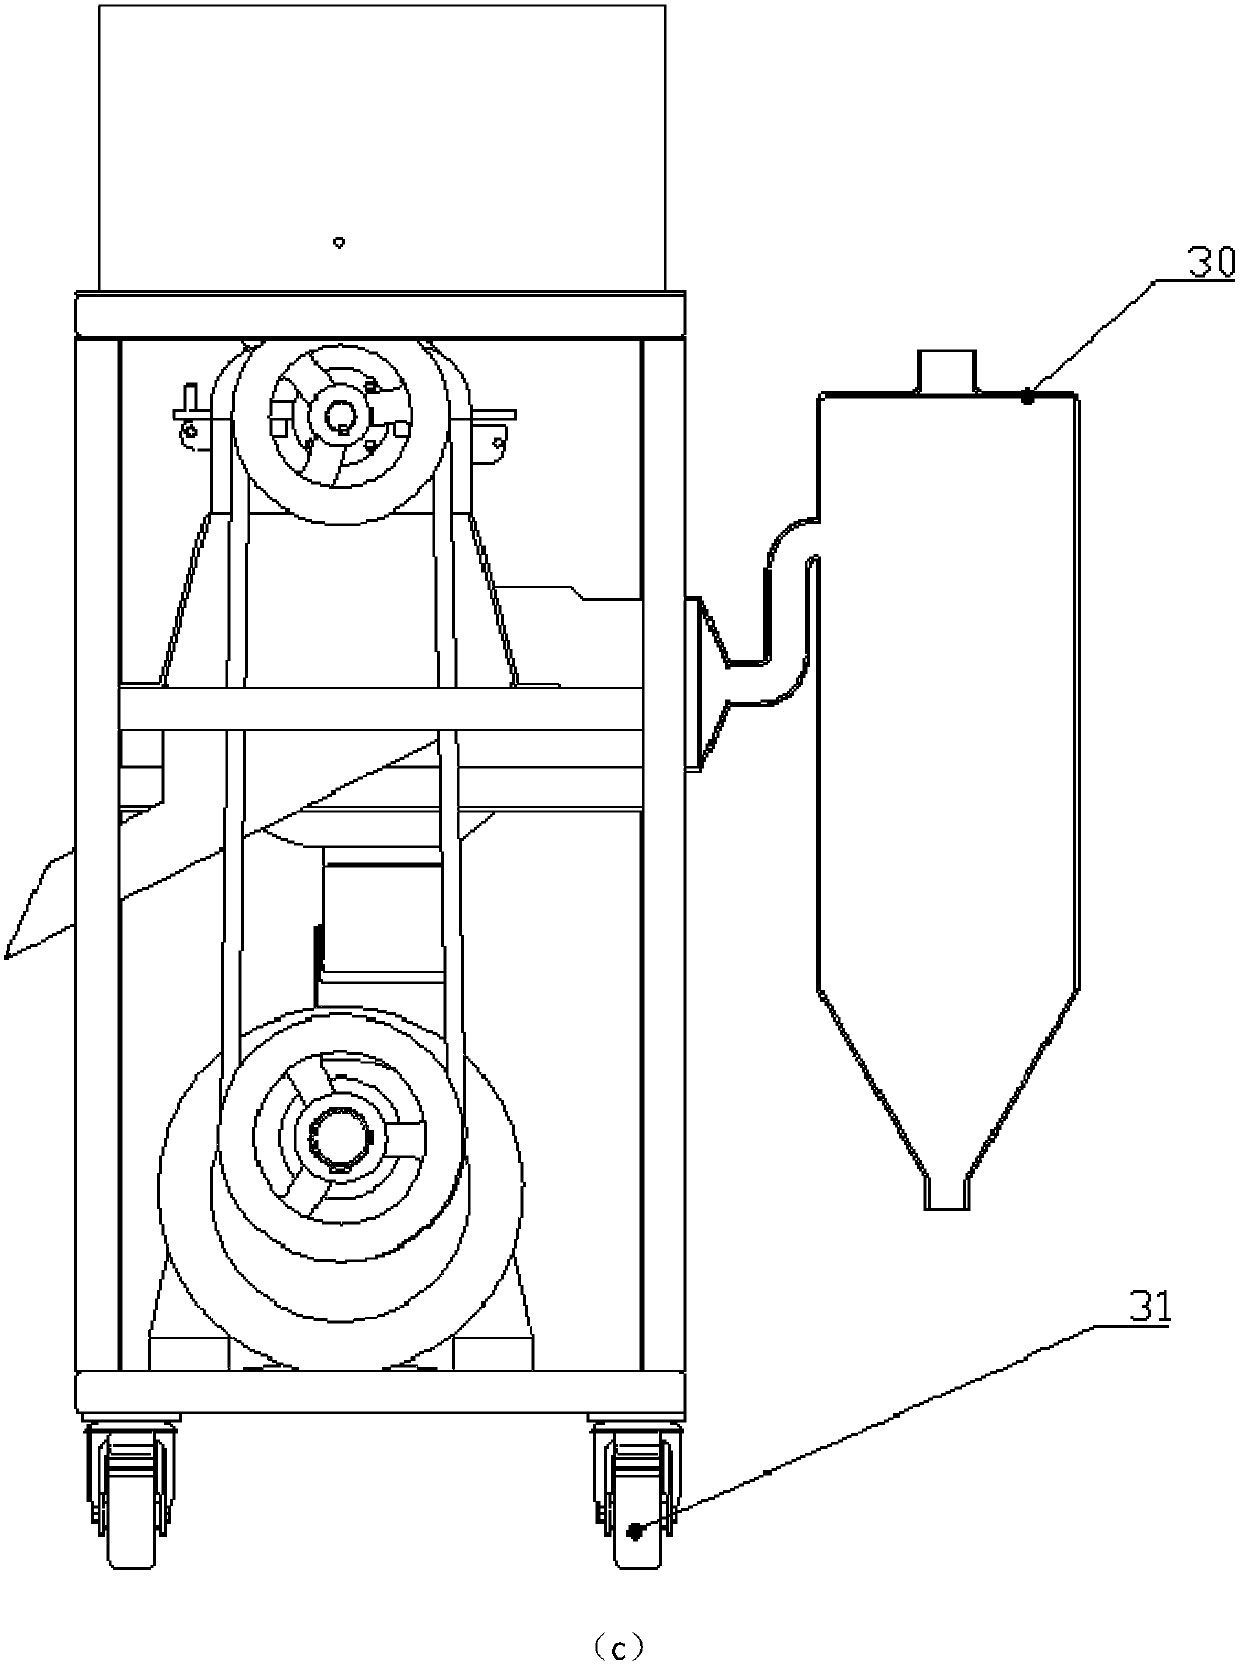 A pounding system of a household type rice mill with germ preservation